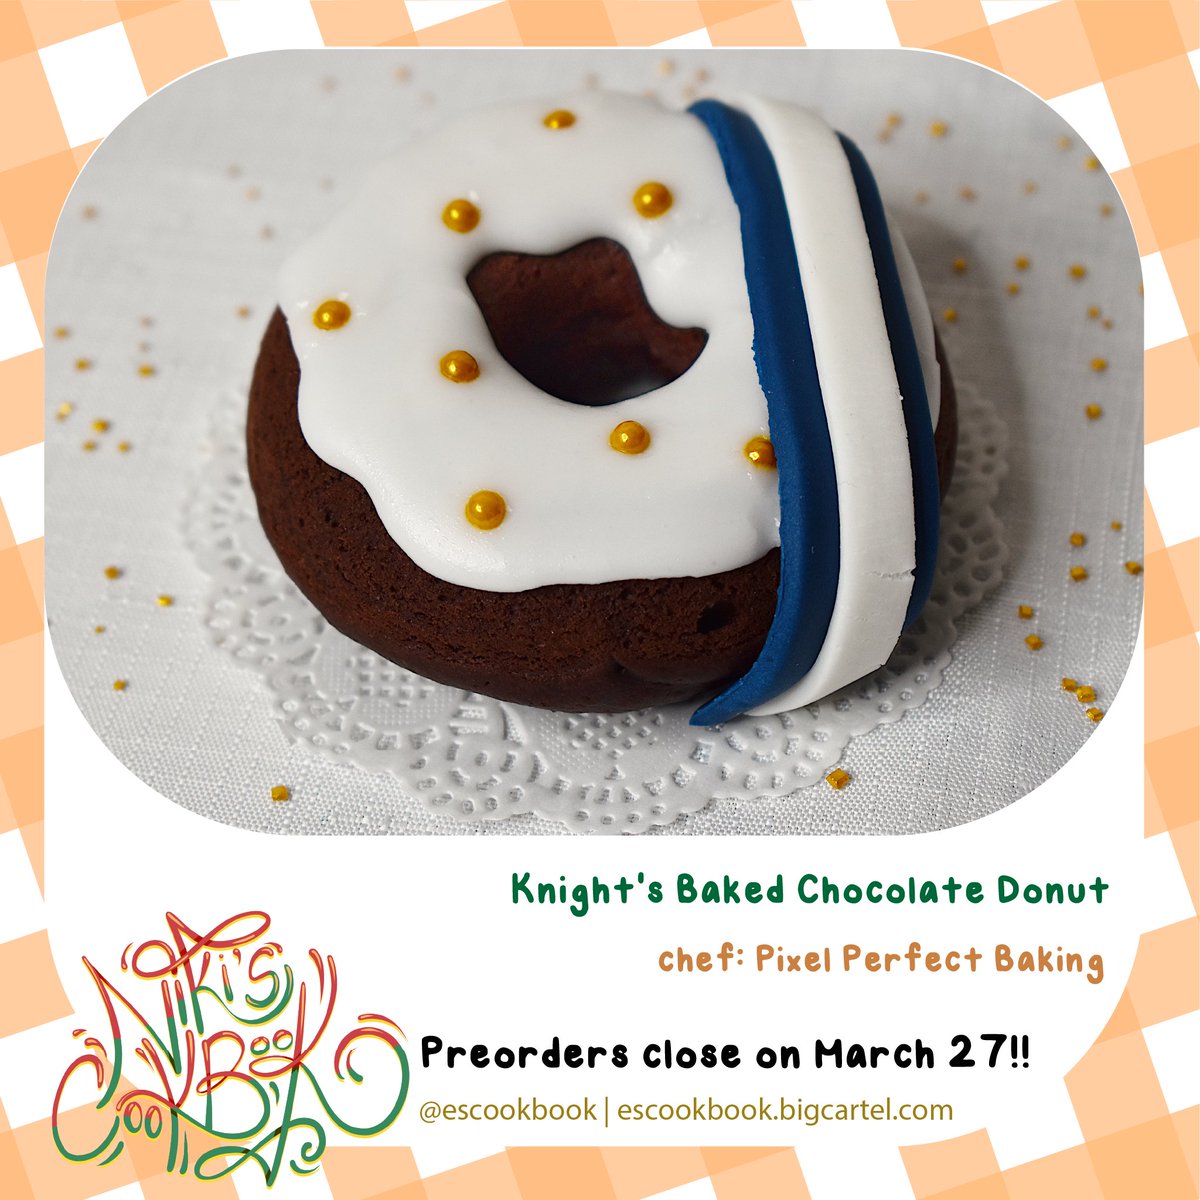 🍳 Happy White Day!! 🍳 Are you enjoying Checkmate? Here's a recipe highlight! A sweet treat perfect for the most chivalrous of knights, Knight's Baked Chocolate Donut by Pixel Perfect Baking!! Preorders for the cookbook end on March 27th! 🍩 escookbook.bigcartel.com